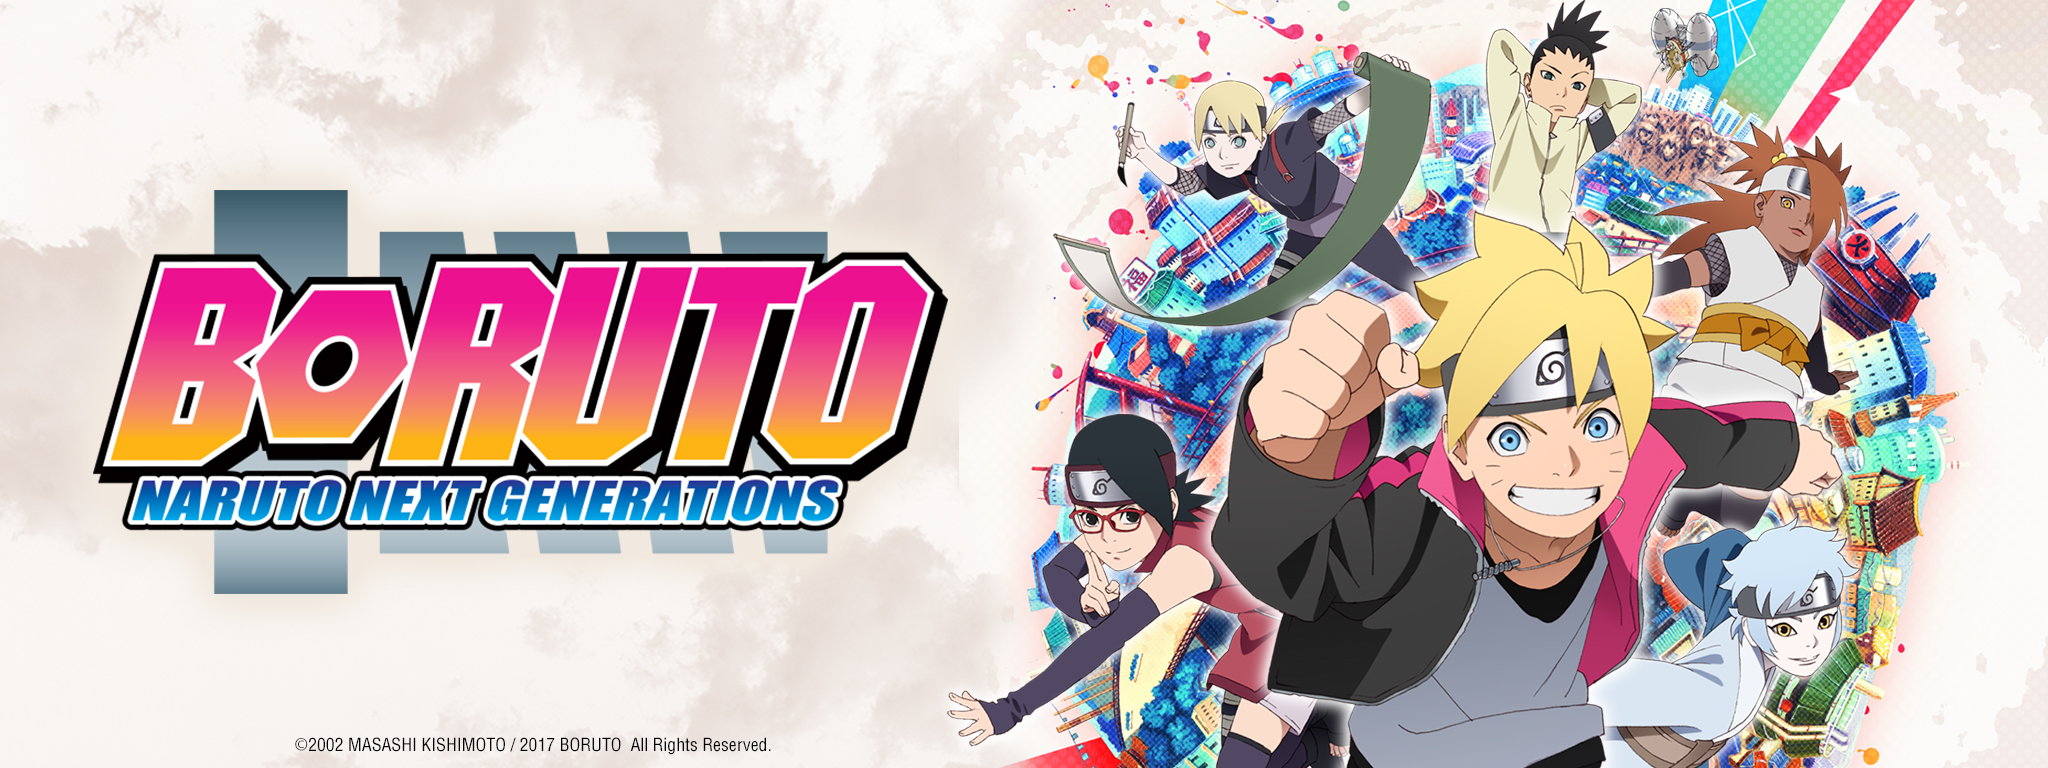 Boruto Naruto Next Generations Episode 94 Watch Online, Release Date, Plot  Details and More